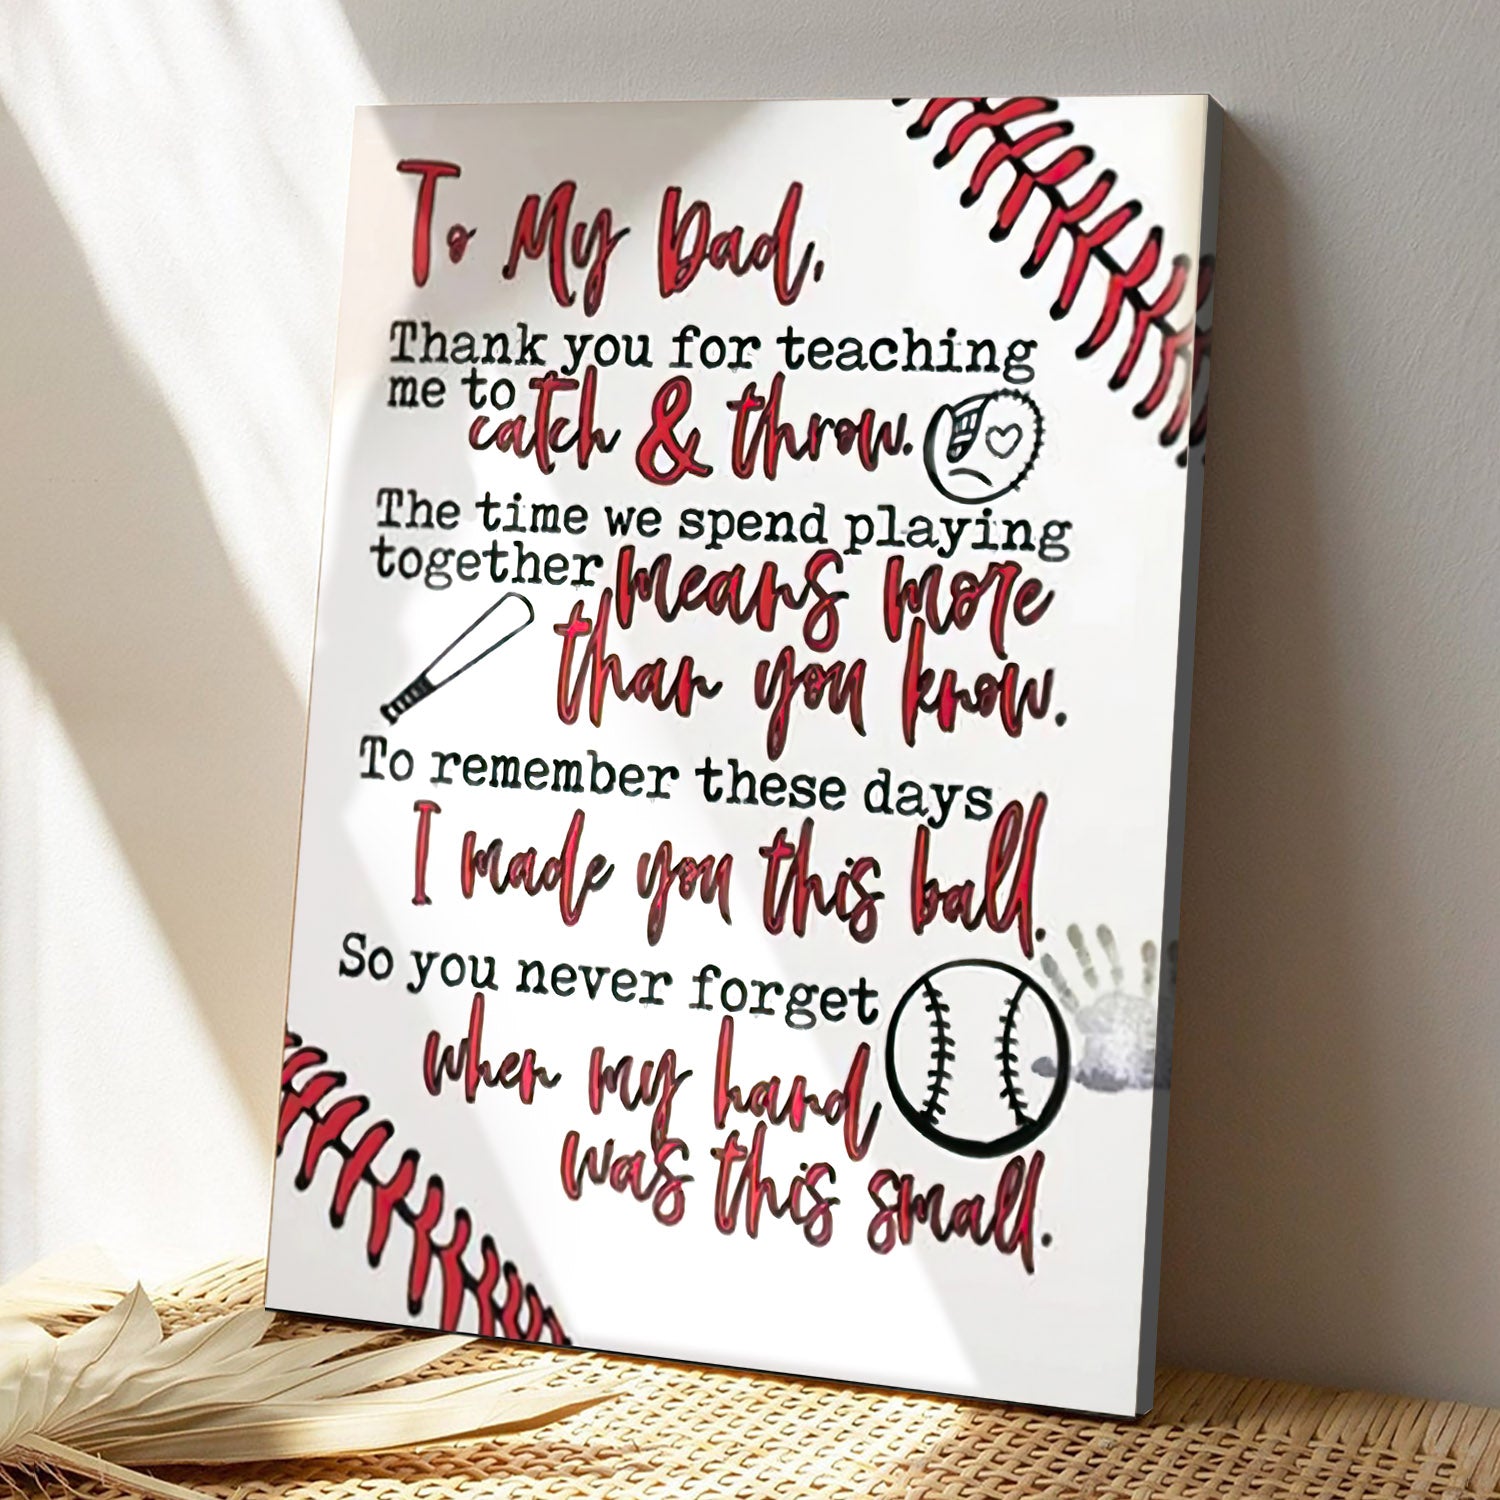 To My Dad - I Made You This Ball - Father's Day Canvas - Baseball Canvas Gift For Dad - Ciaocustom